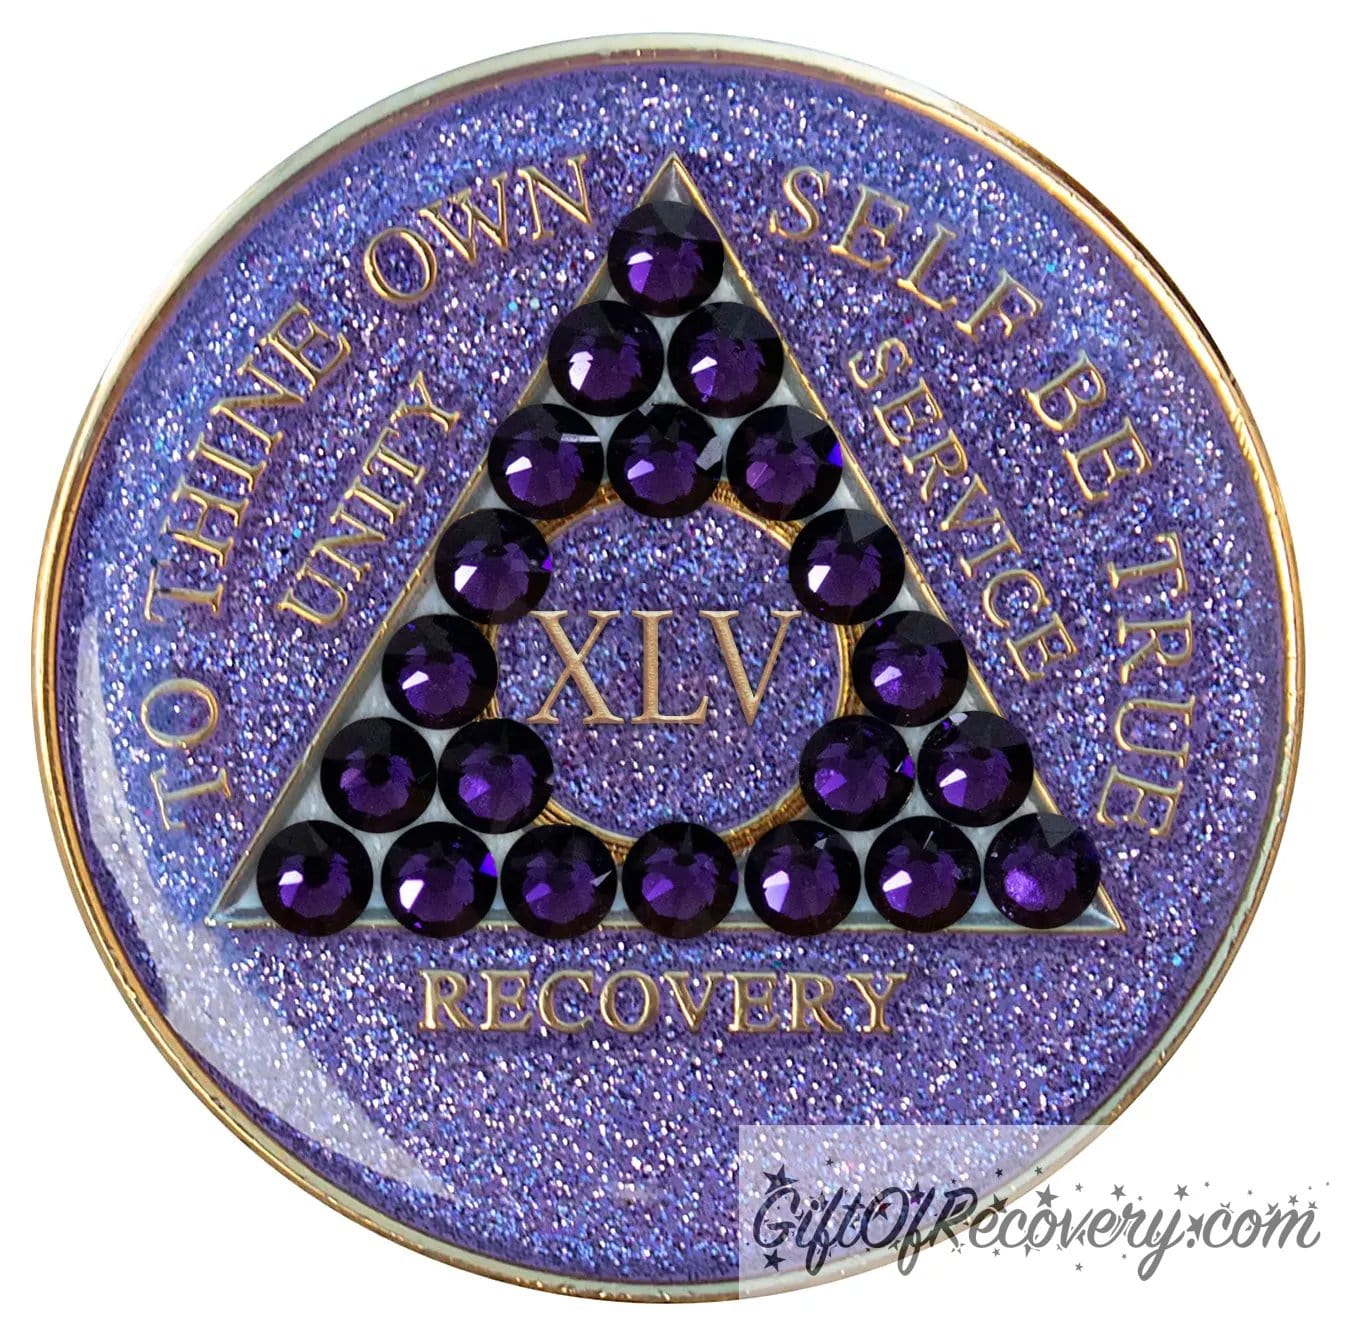 45 year glitter purple AA medallion with 21 purple velvet genuine crystals, that create the triangle in middle, and to thine own self be true, unity, service, recovery, the roman numeral in the center of the circle triangle, along with the rim of the recovery medallion, are embossed in 14 gold plated brass, sealed in resin for glossy finish.